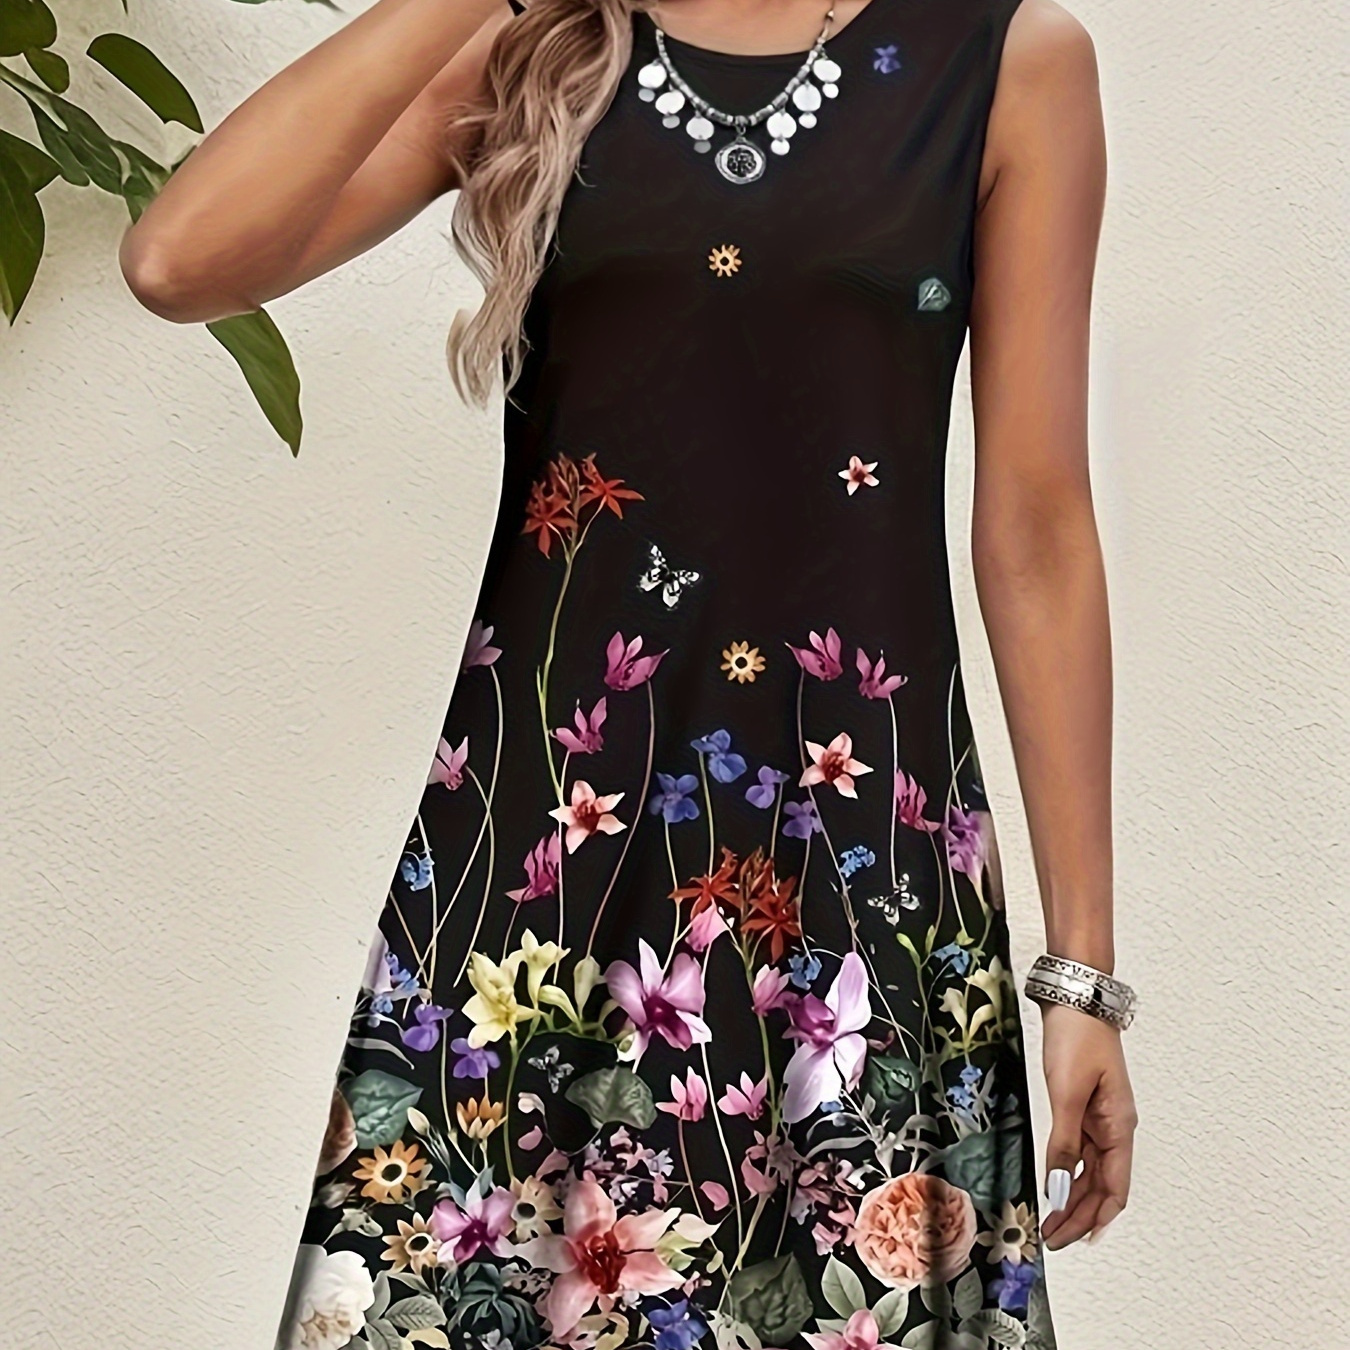 

Floral Print Crew Neck Dress, Casual Sleeveless Dress For Summer, Women's Clothing